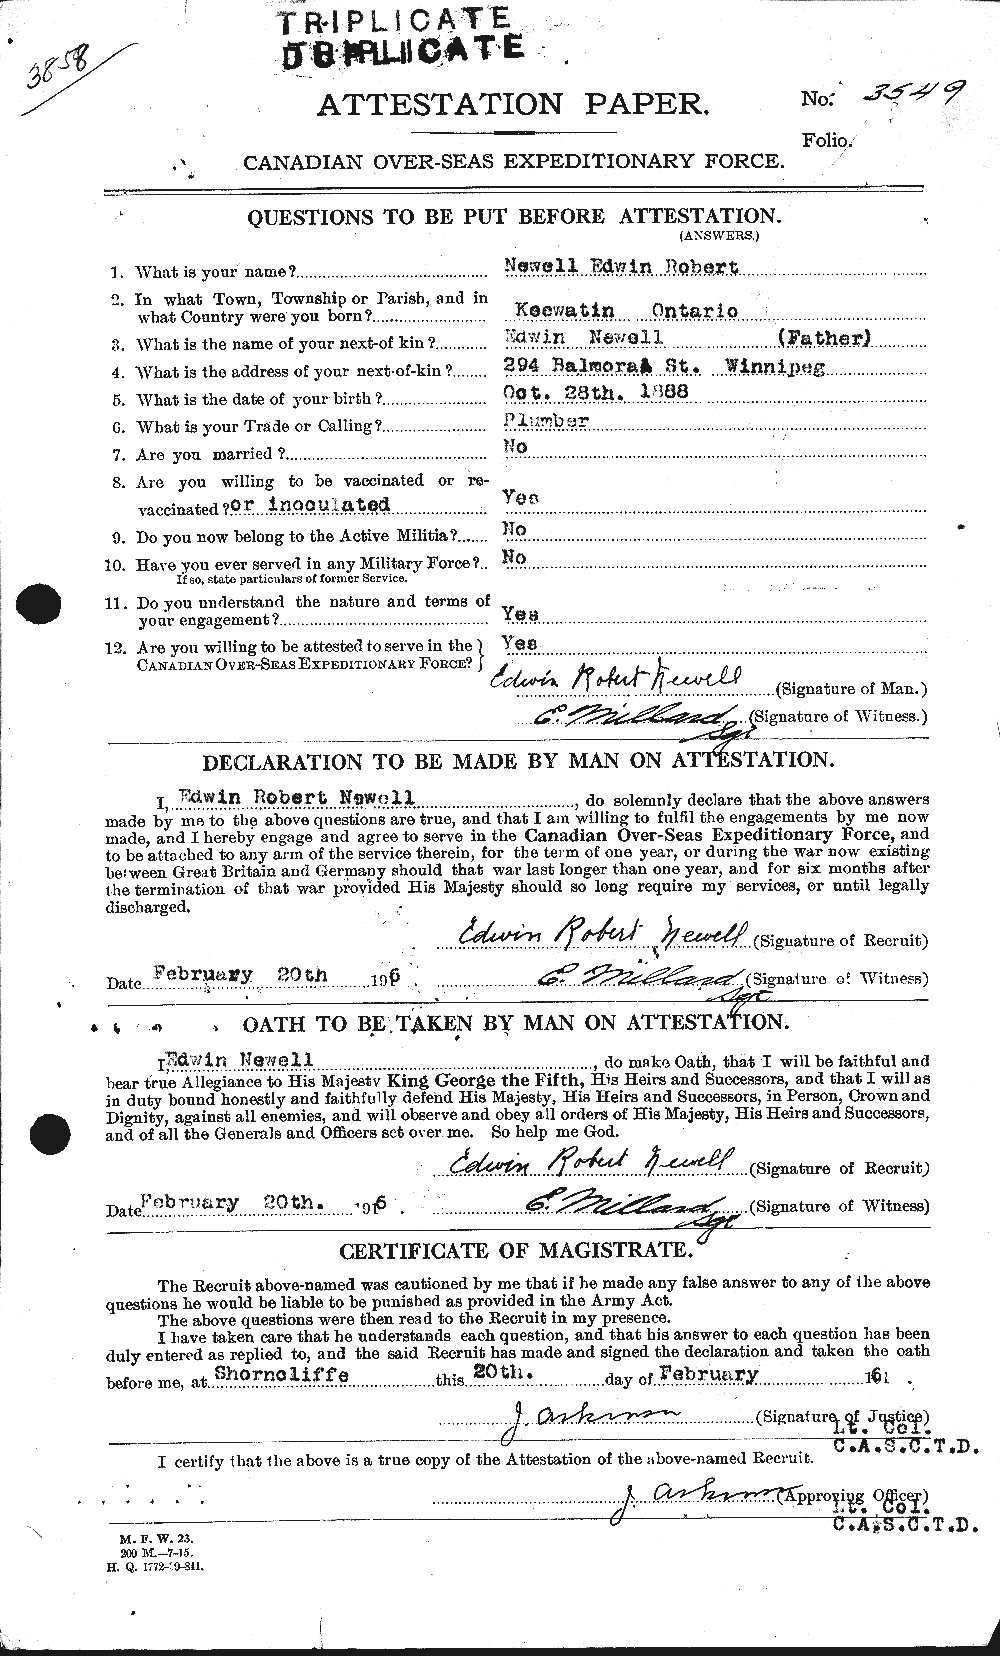 Personnel Records of the First World War - CEF 544247a